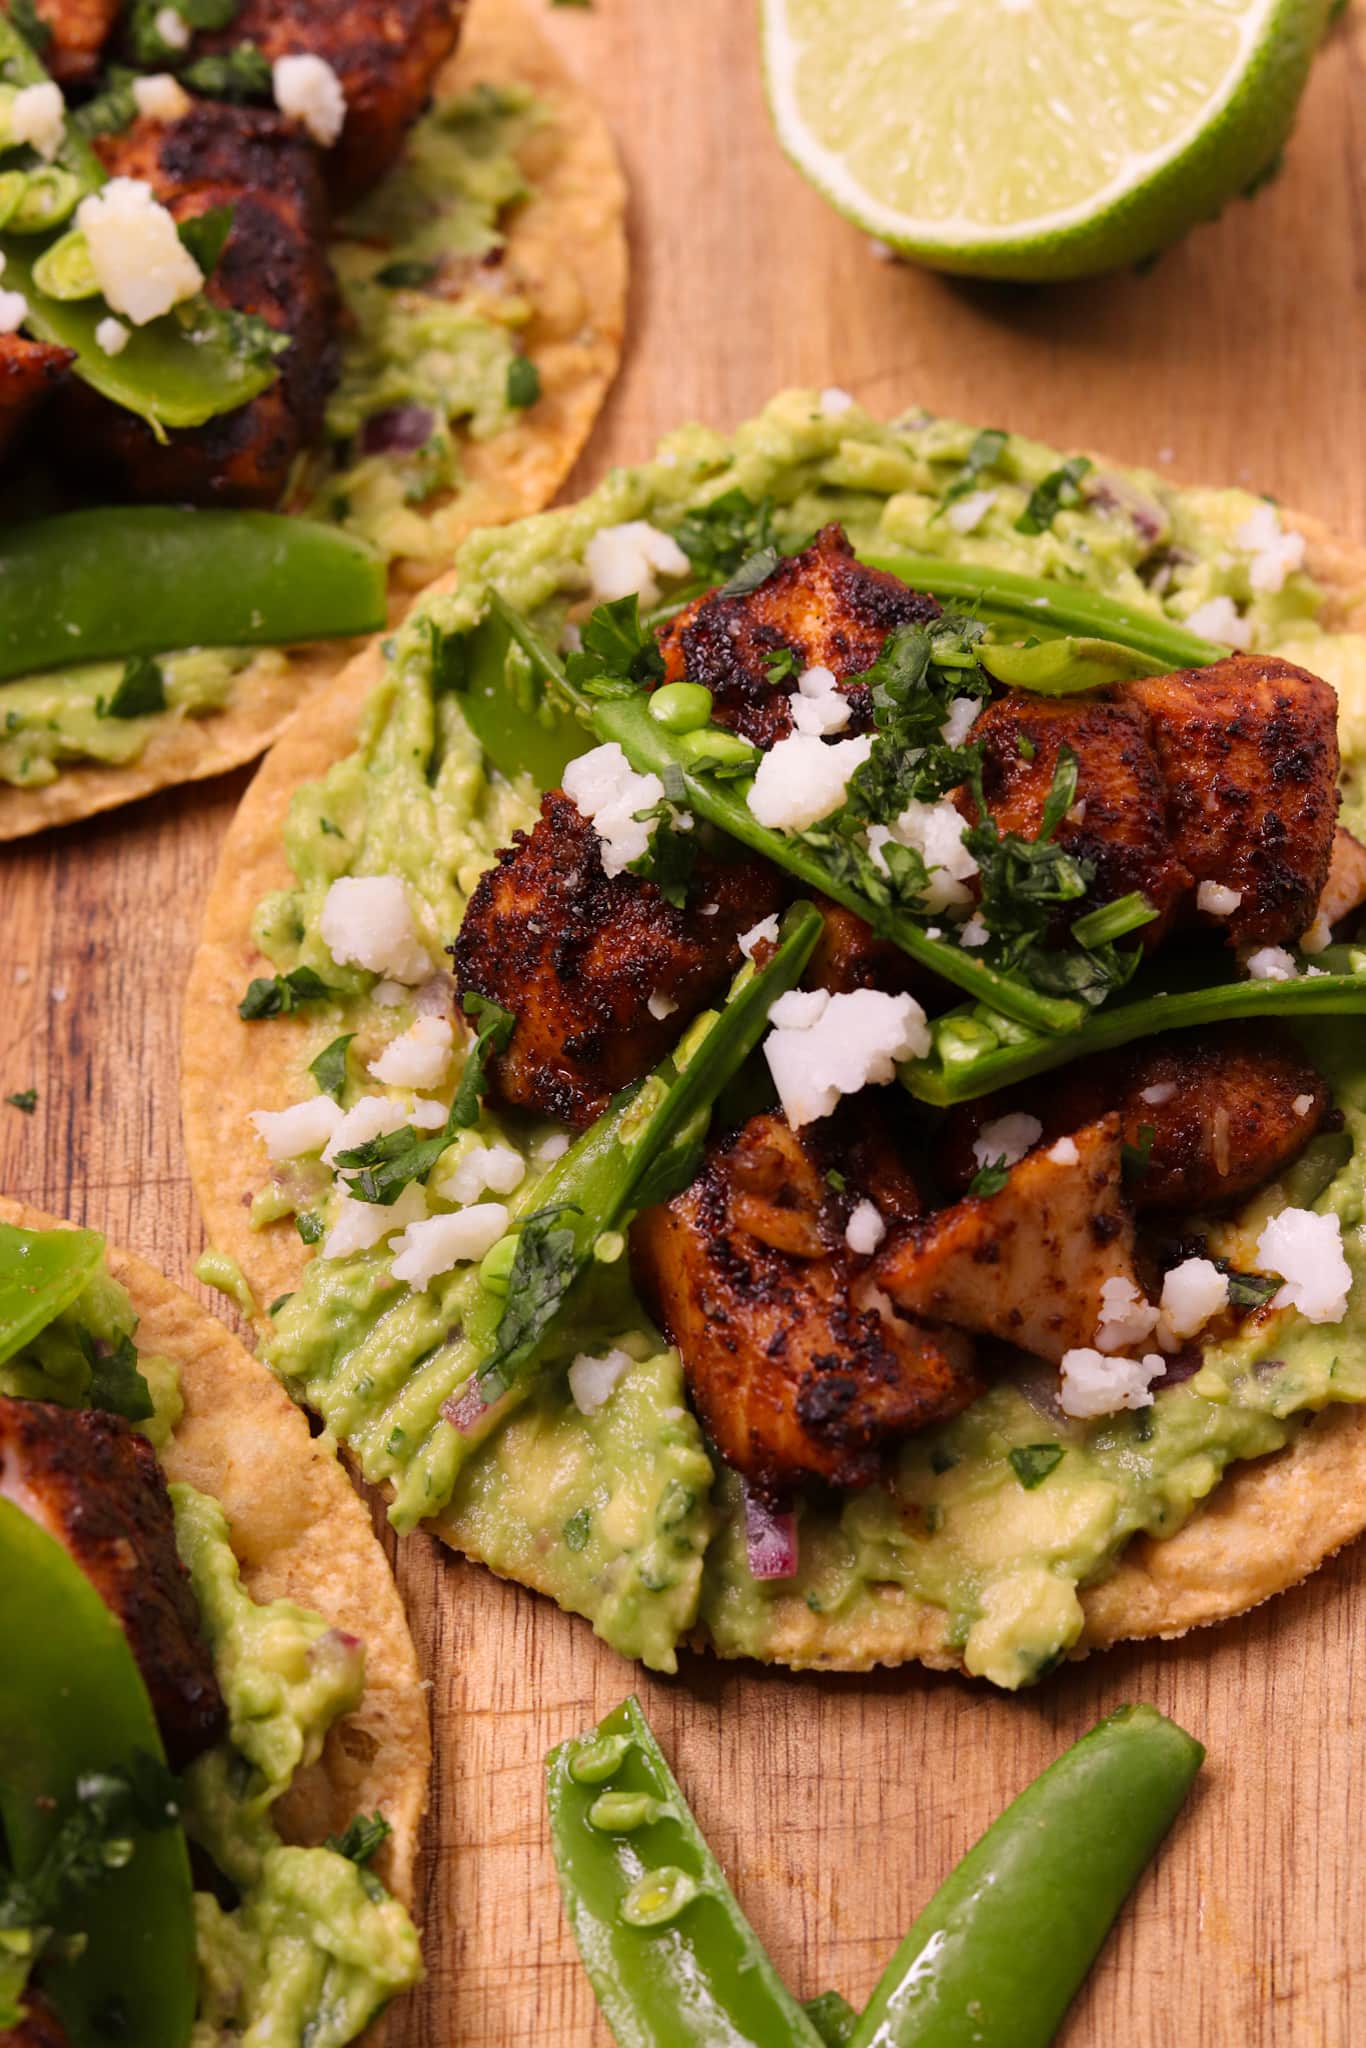 Smoky Chipotle Salmon Tostadas with Quick-Pickled Snap Peas pic